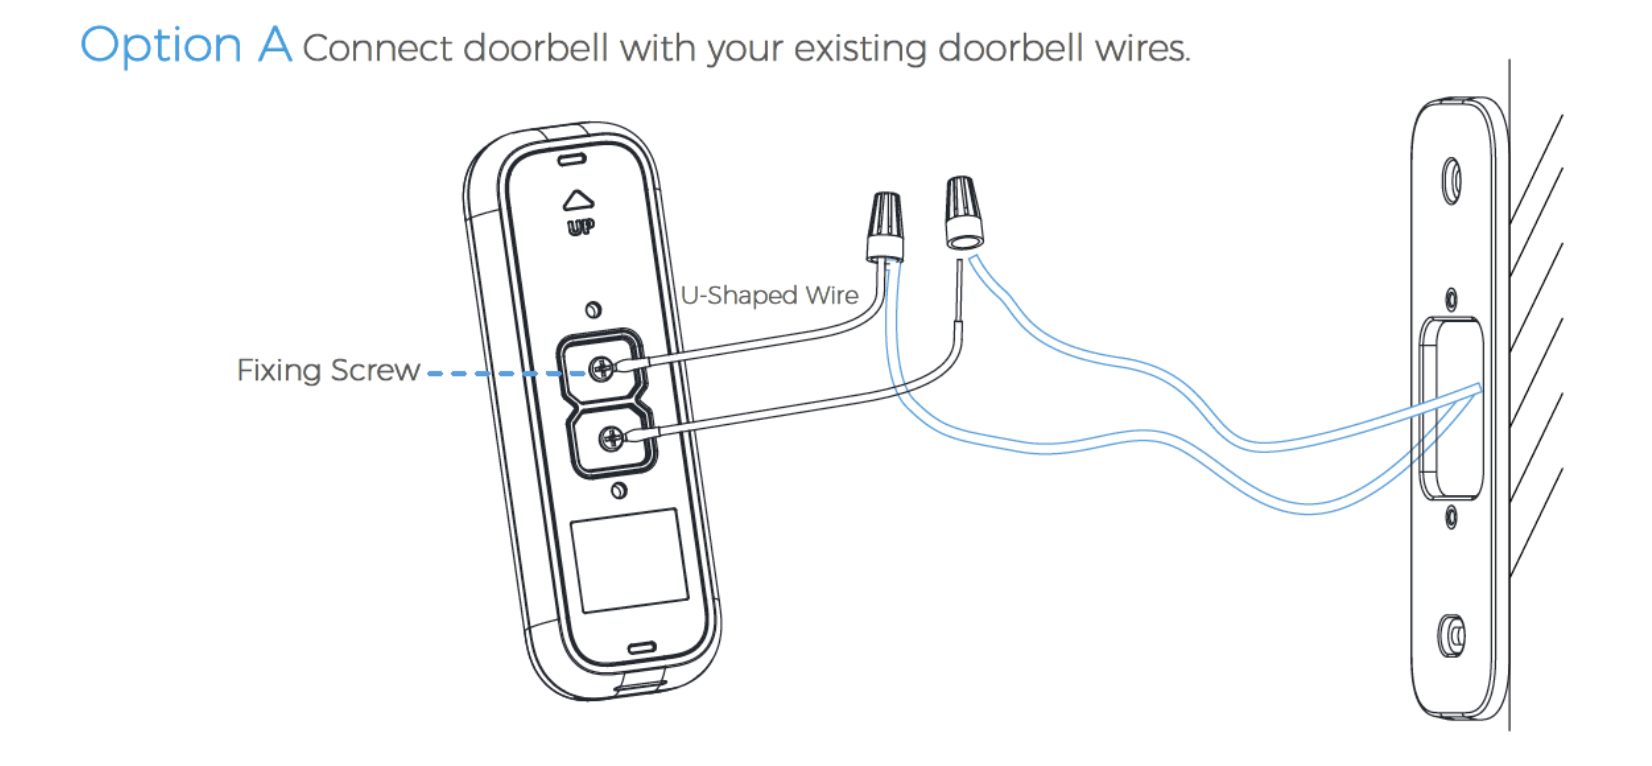 How To Install The Alula Doorbell